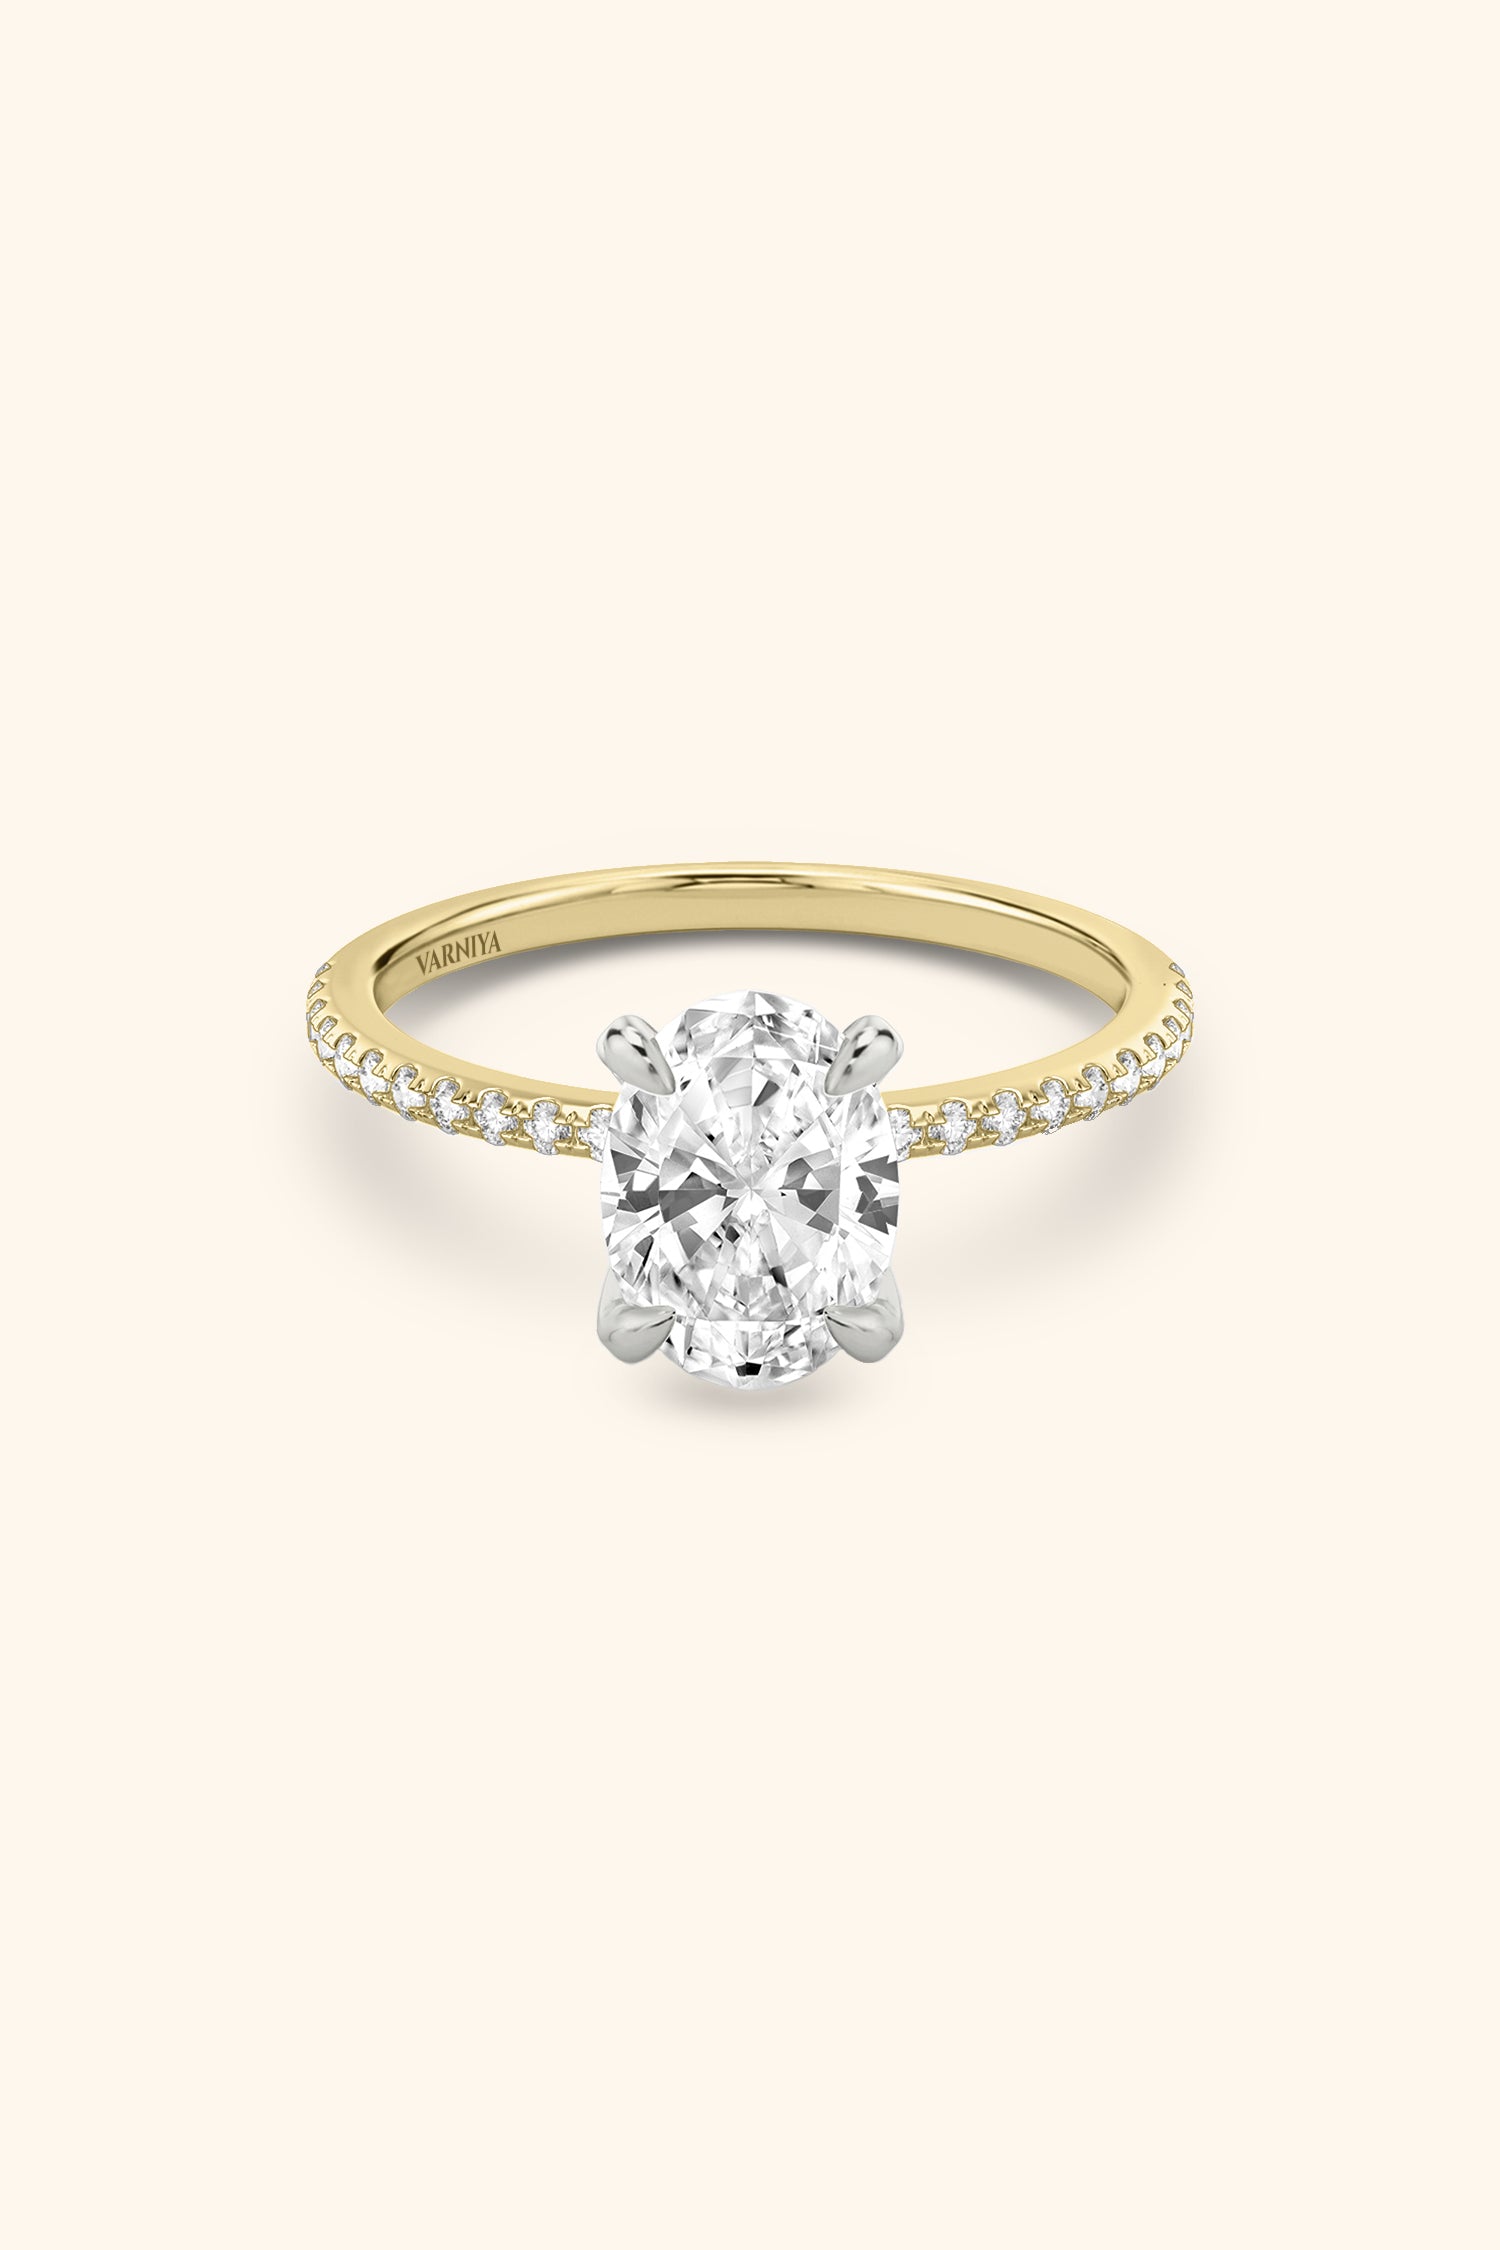 Dual Tone Glance Pavé Ring with Oval Solitaire